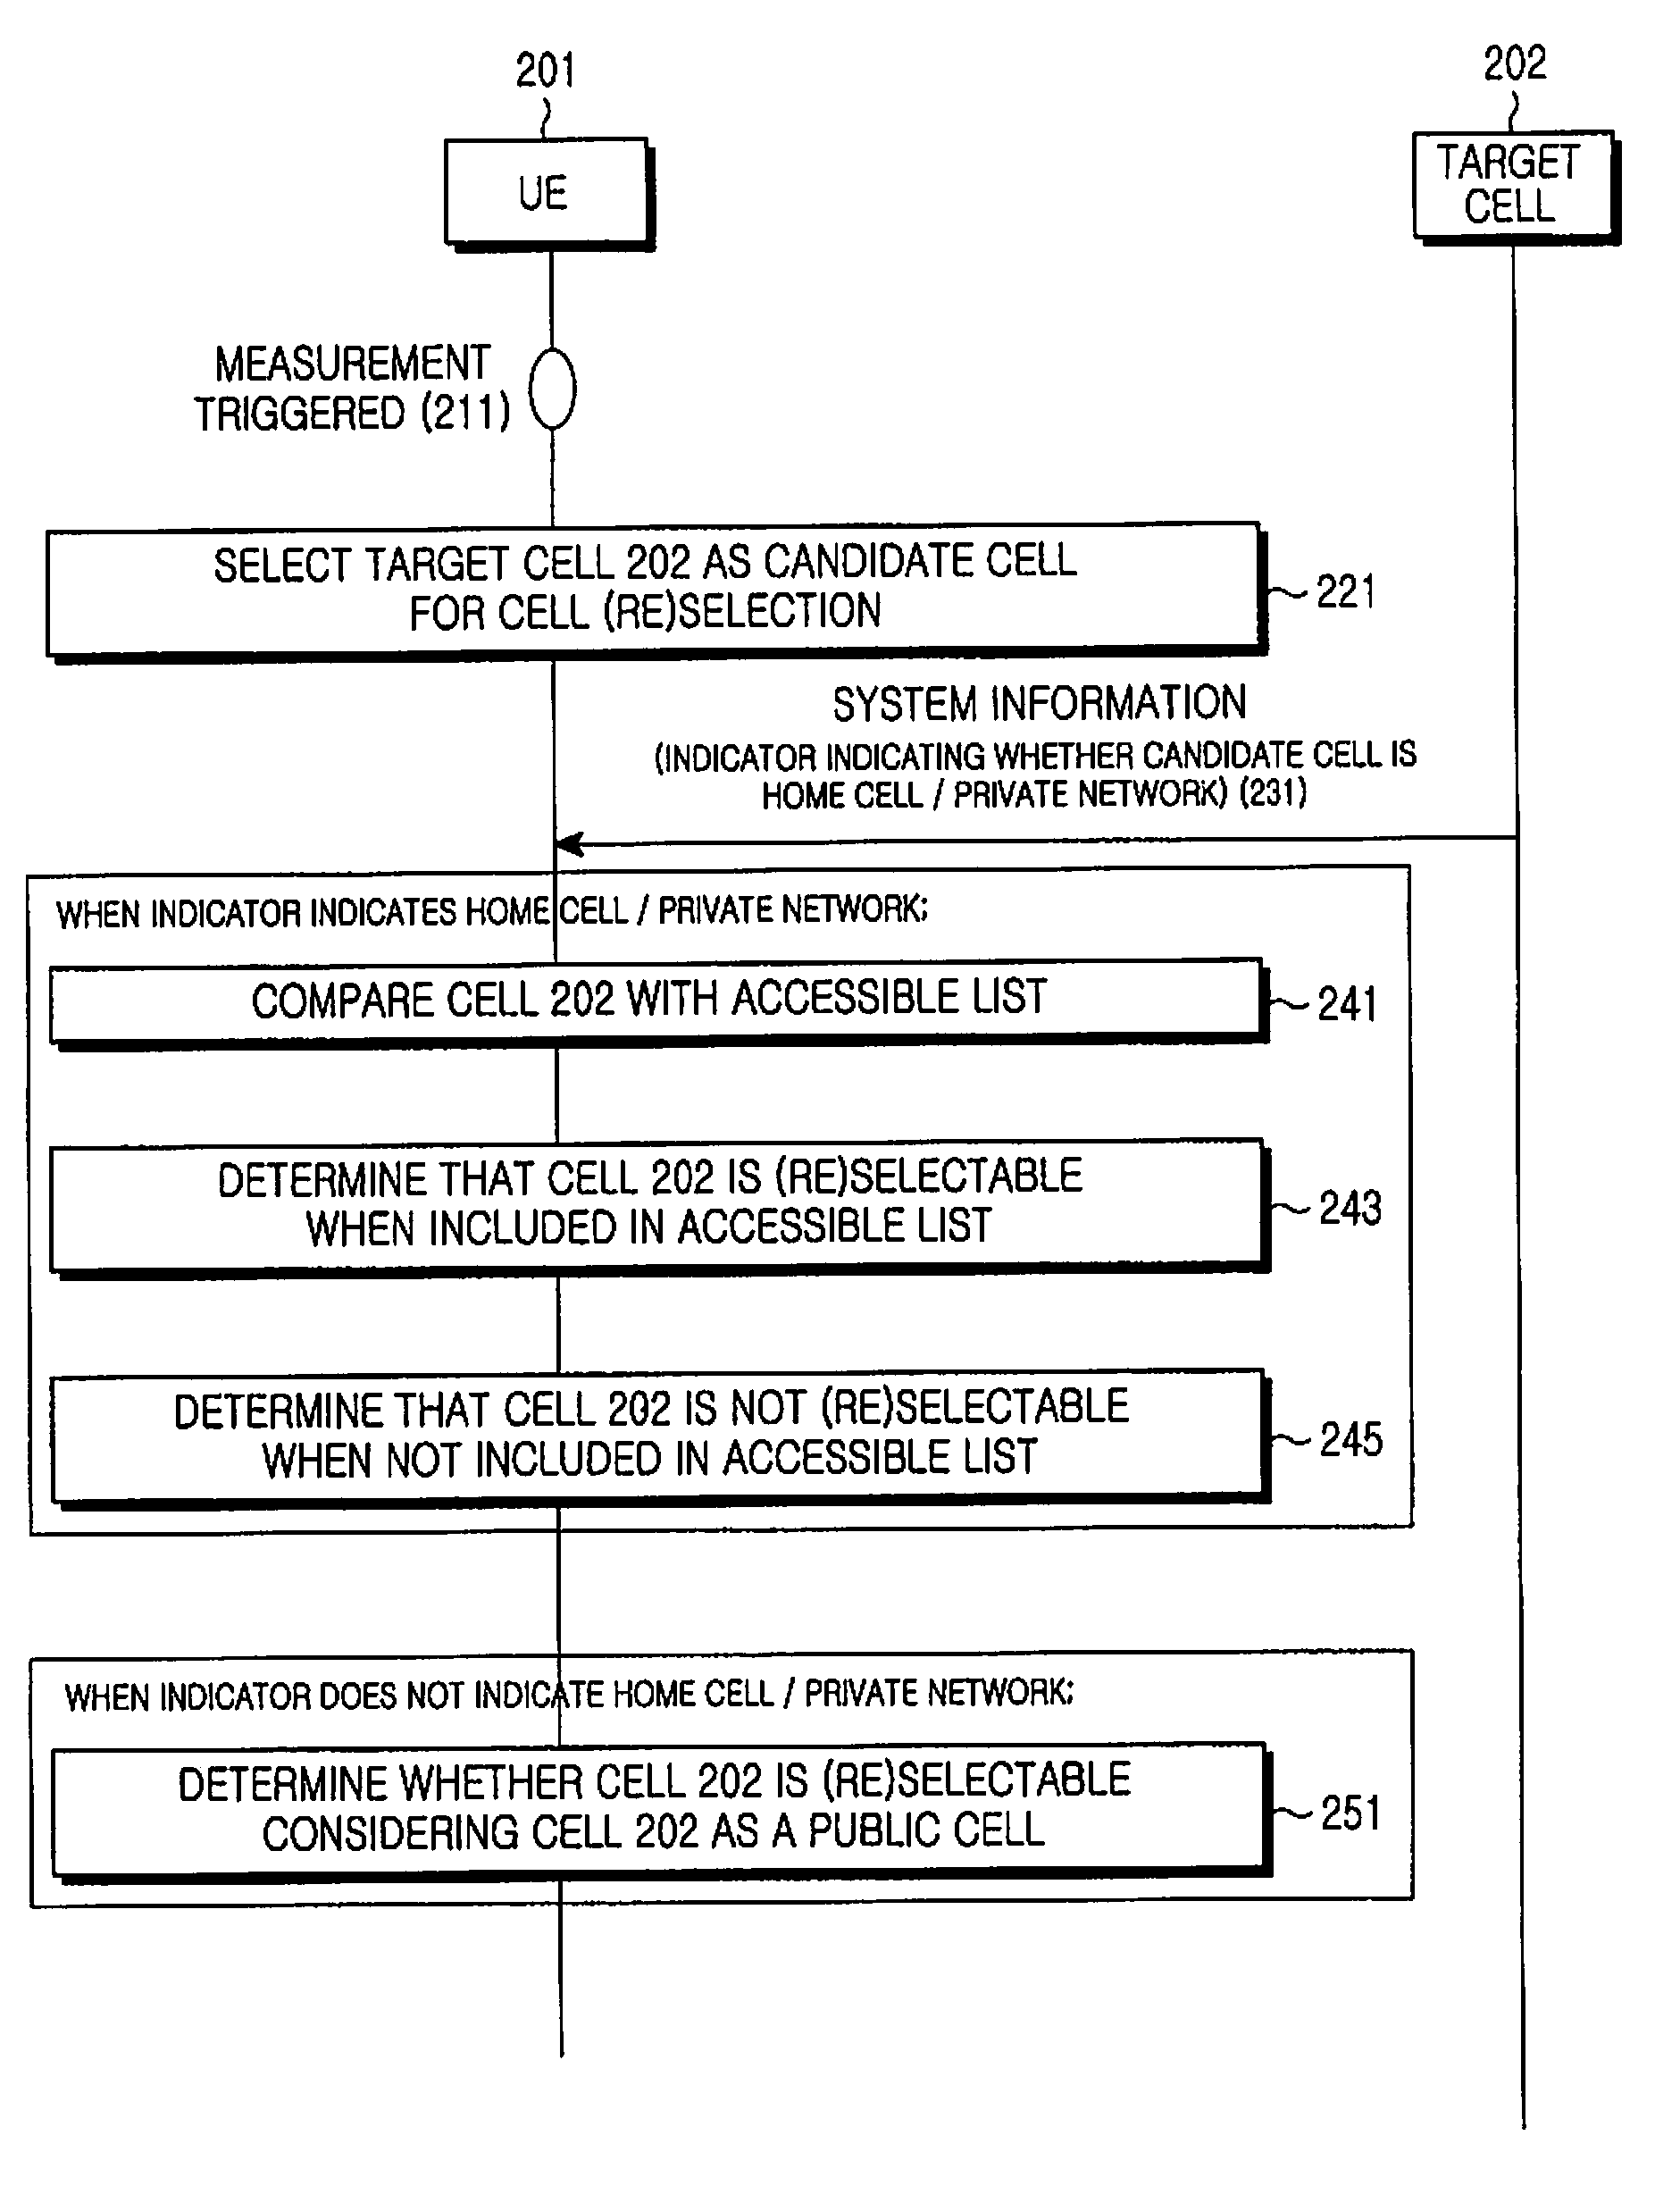 Apparatus and method for performing cell selection to home cell or private network in a mobile communication system